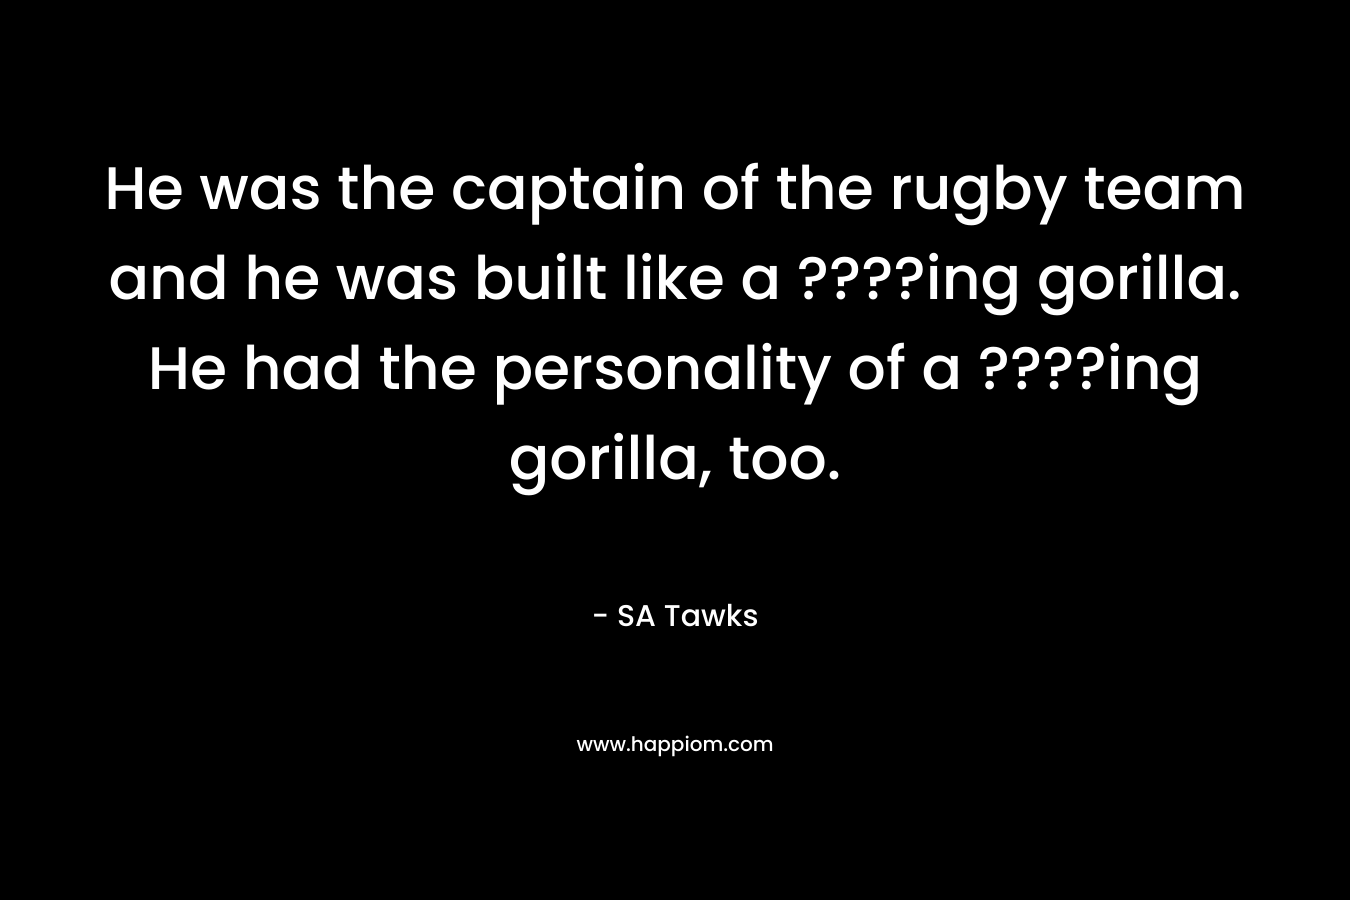 He was the captain of the rugby team and he was built like a ????ing gorilla. He had the personality of a ????ing gorilla, too. – SA Tawks